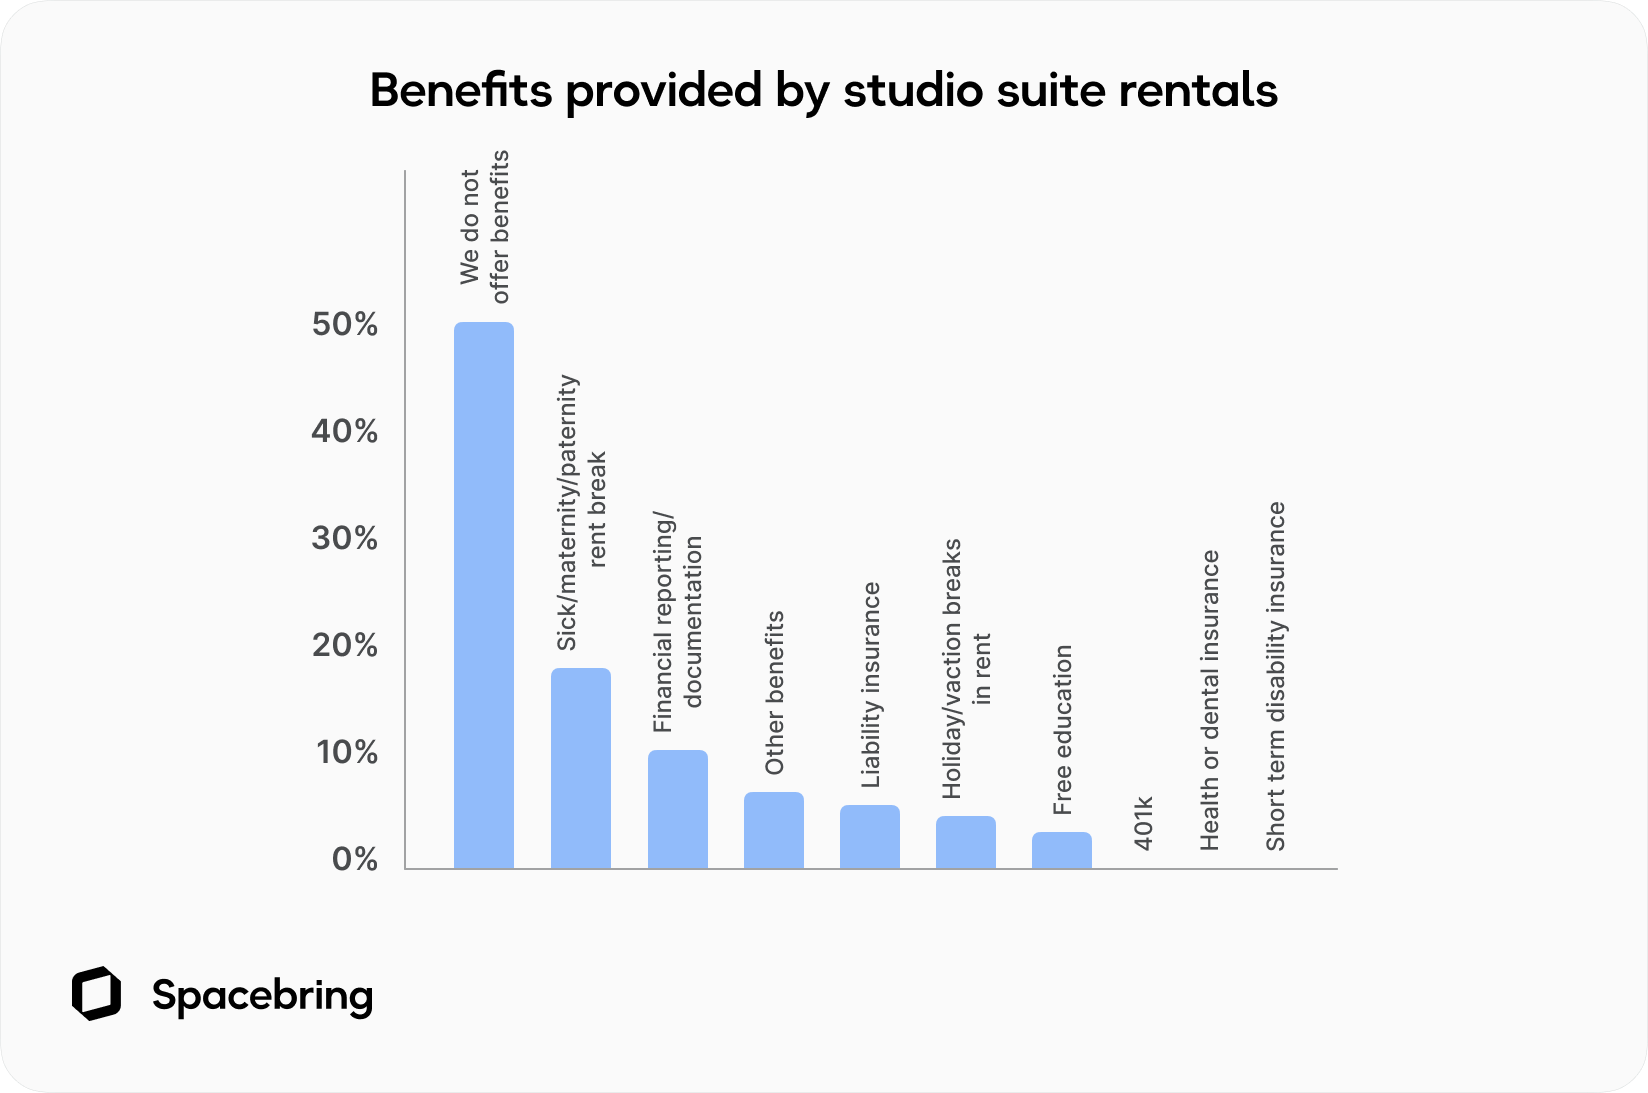 Benefits provided by salon suite rentals